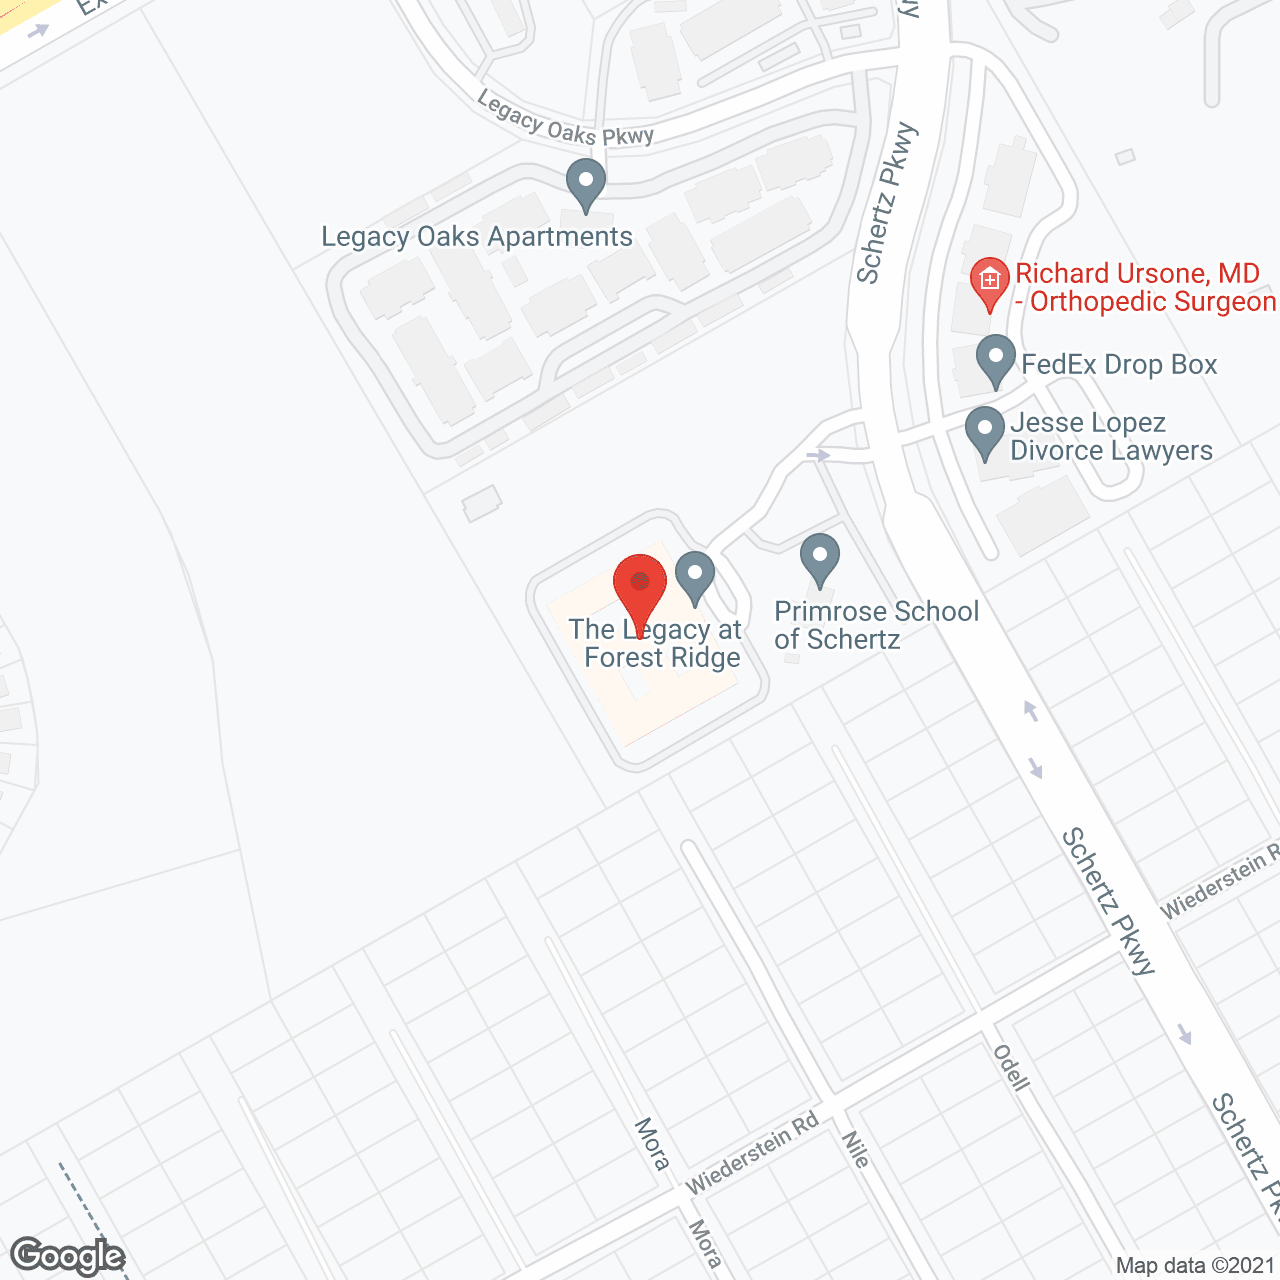 The Legacy at Forest Ridge in google map